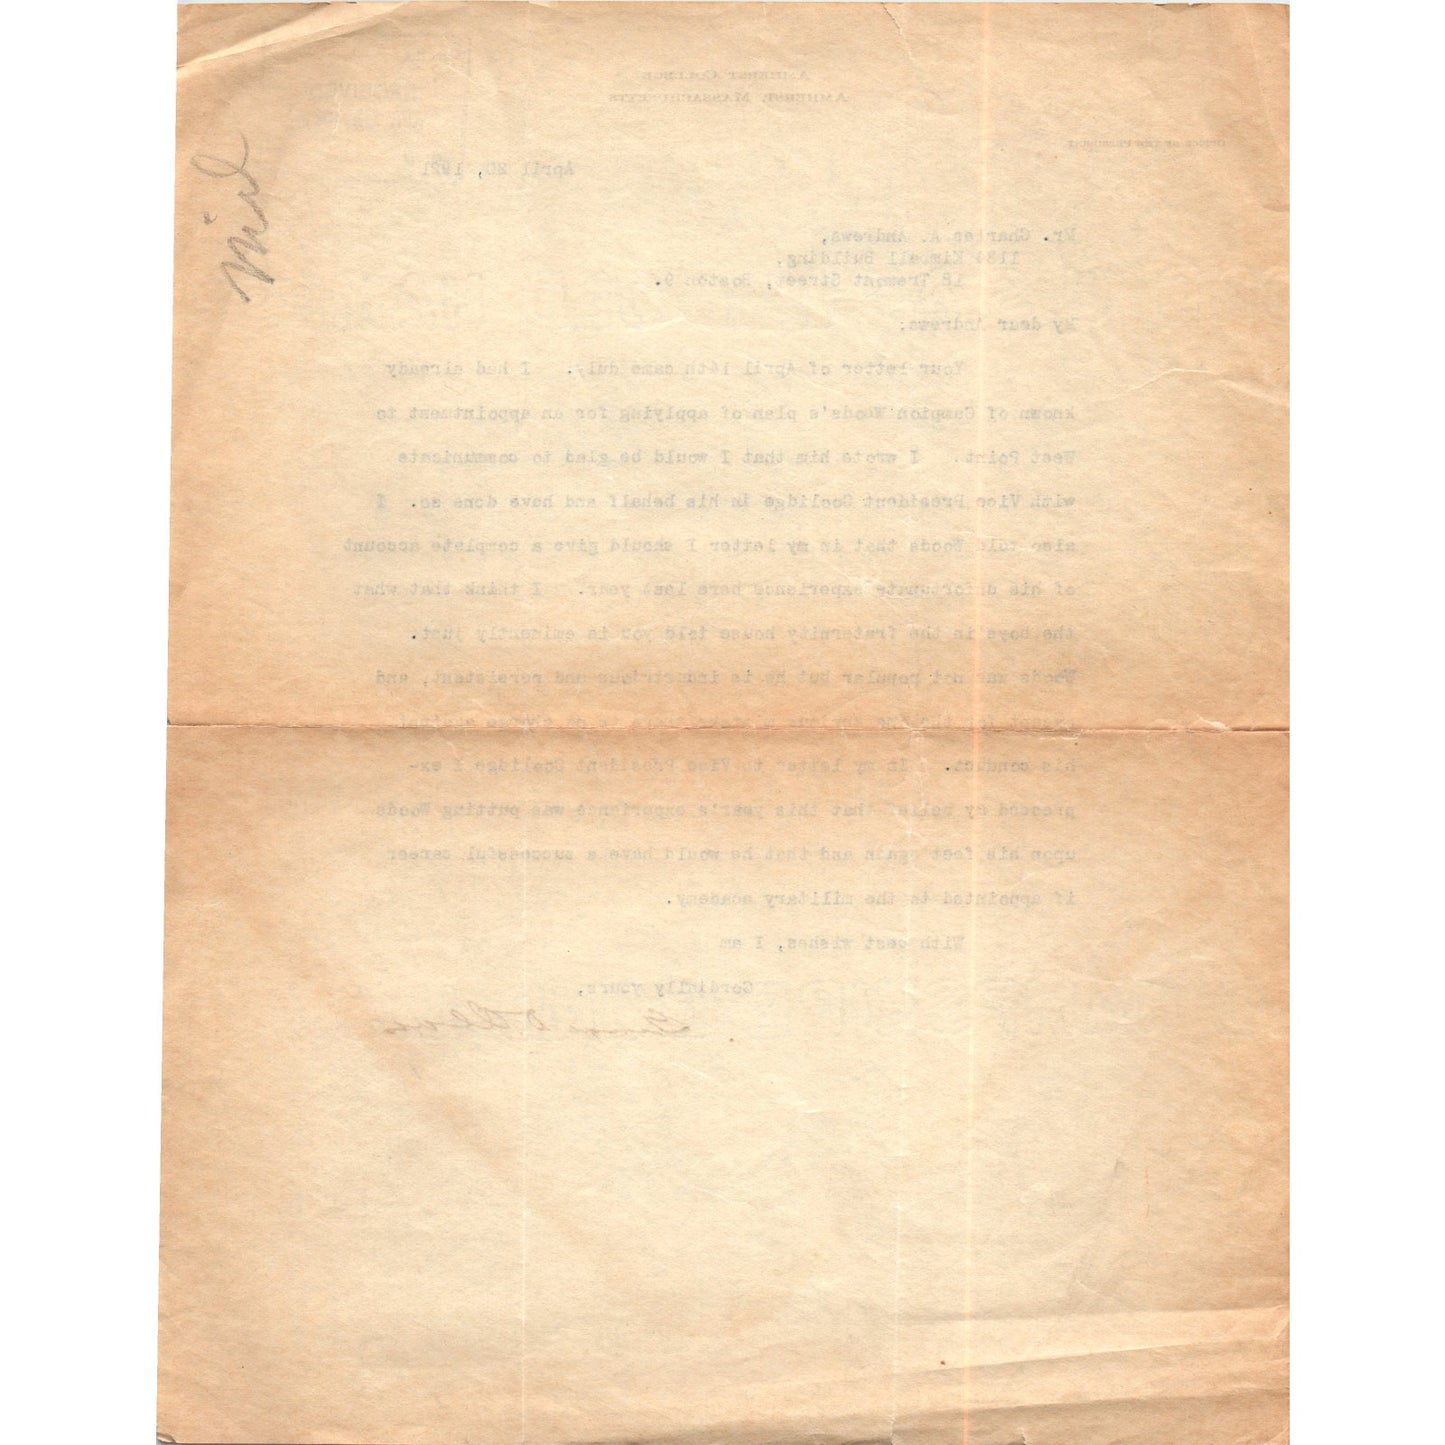 1921 Amherst College Letterhead to Mr. Charles A. Andrews D18